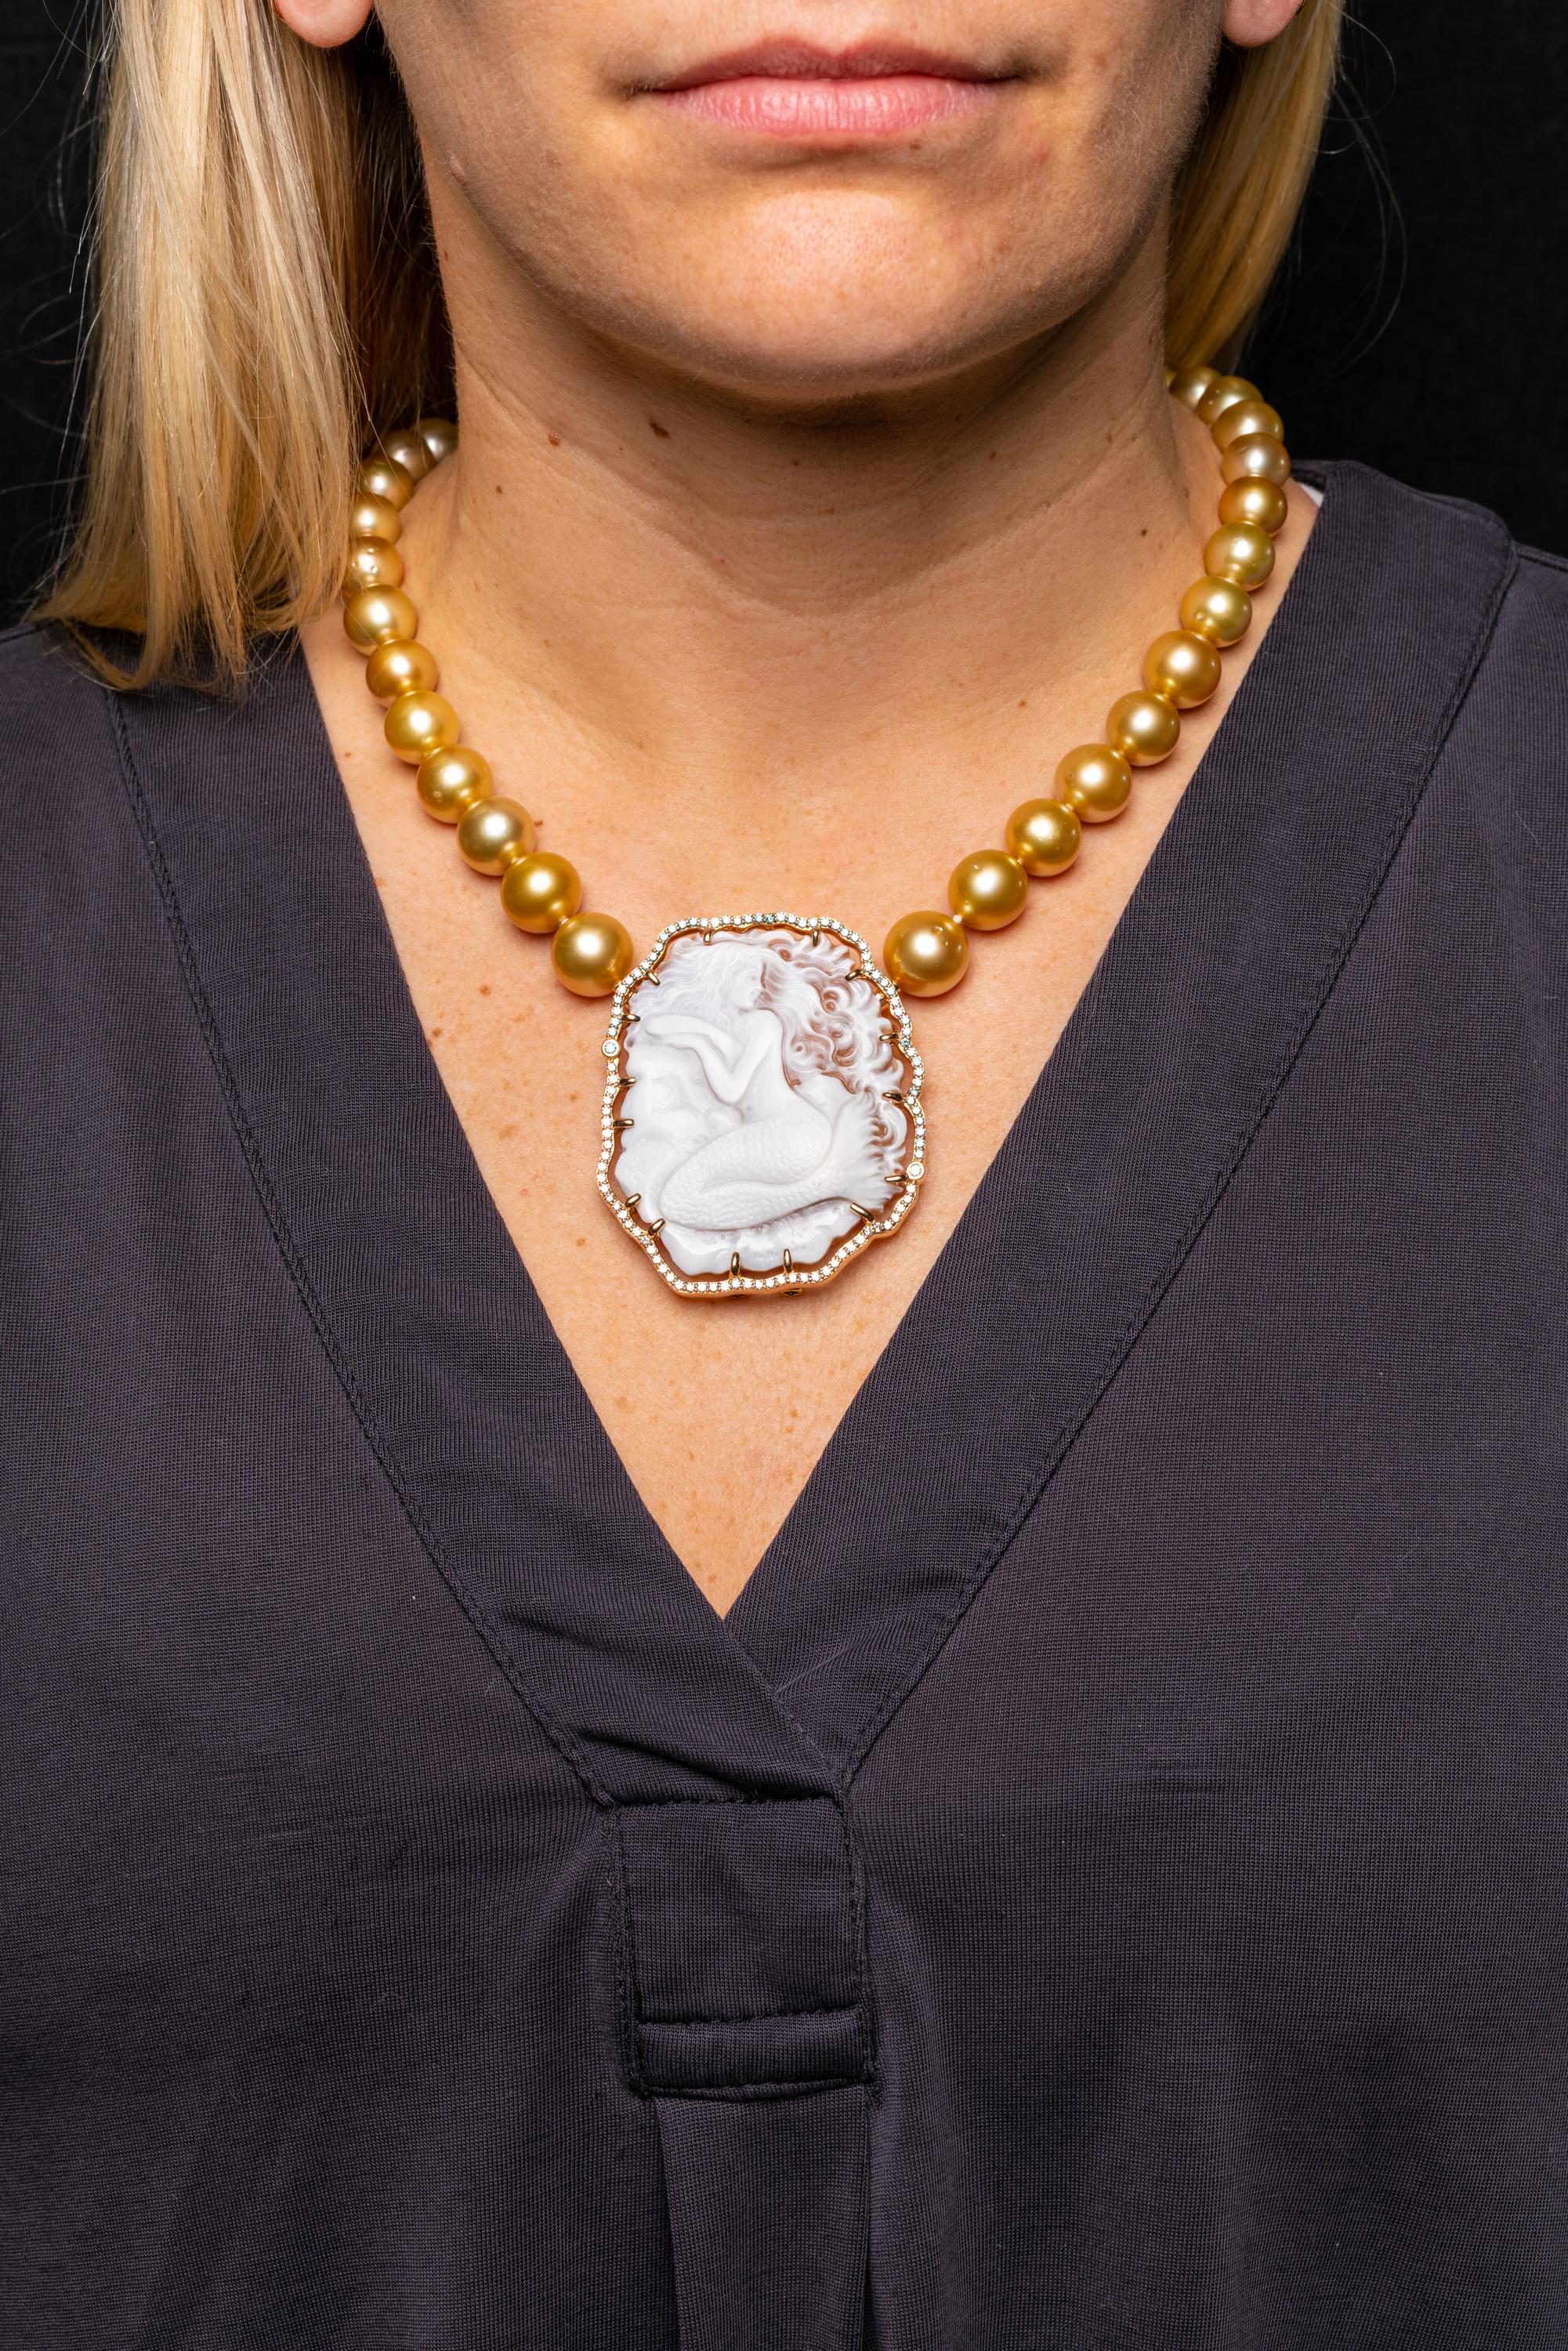 Bead South Sea Golden Pearl Necklace with Mermaid Cameo Clasp and Brooch For Sale